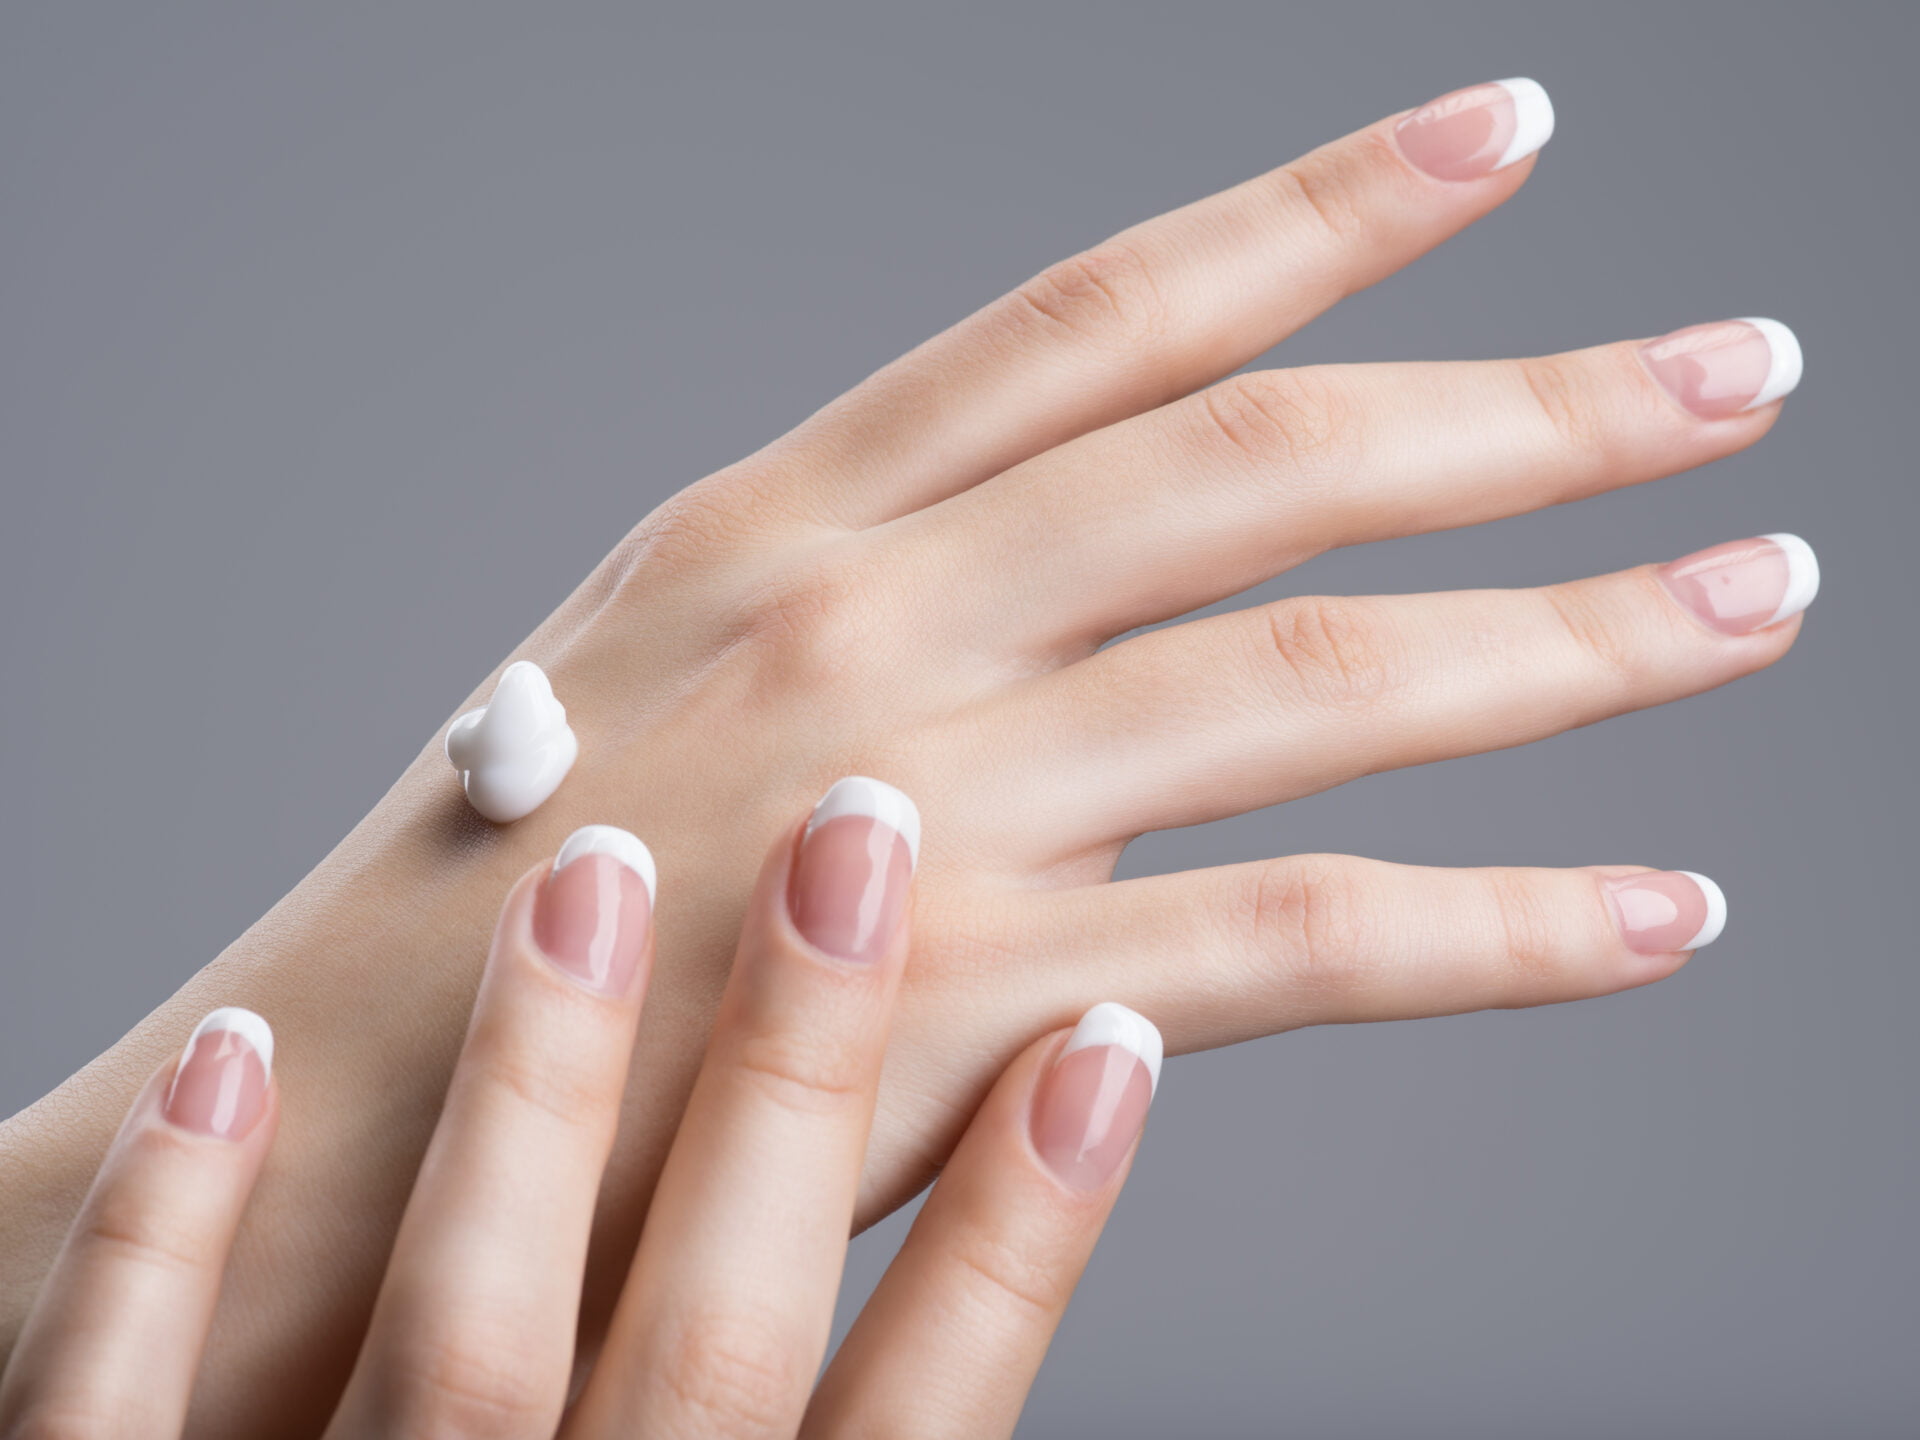 Close-up female hands apllying hand cream. with french manicure on nails